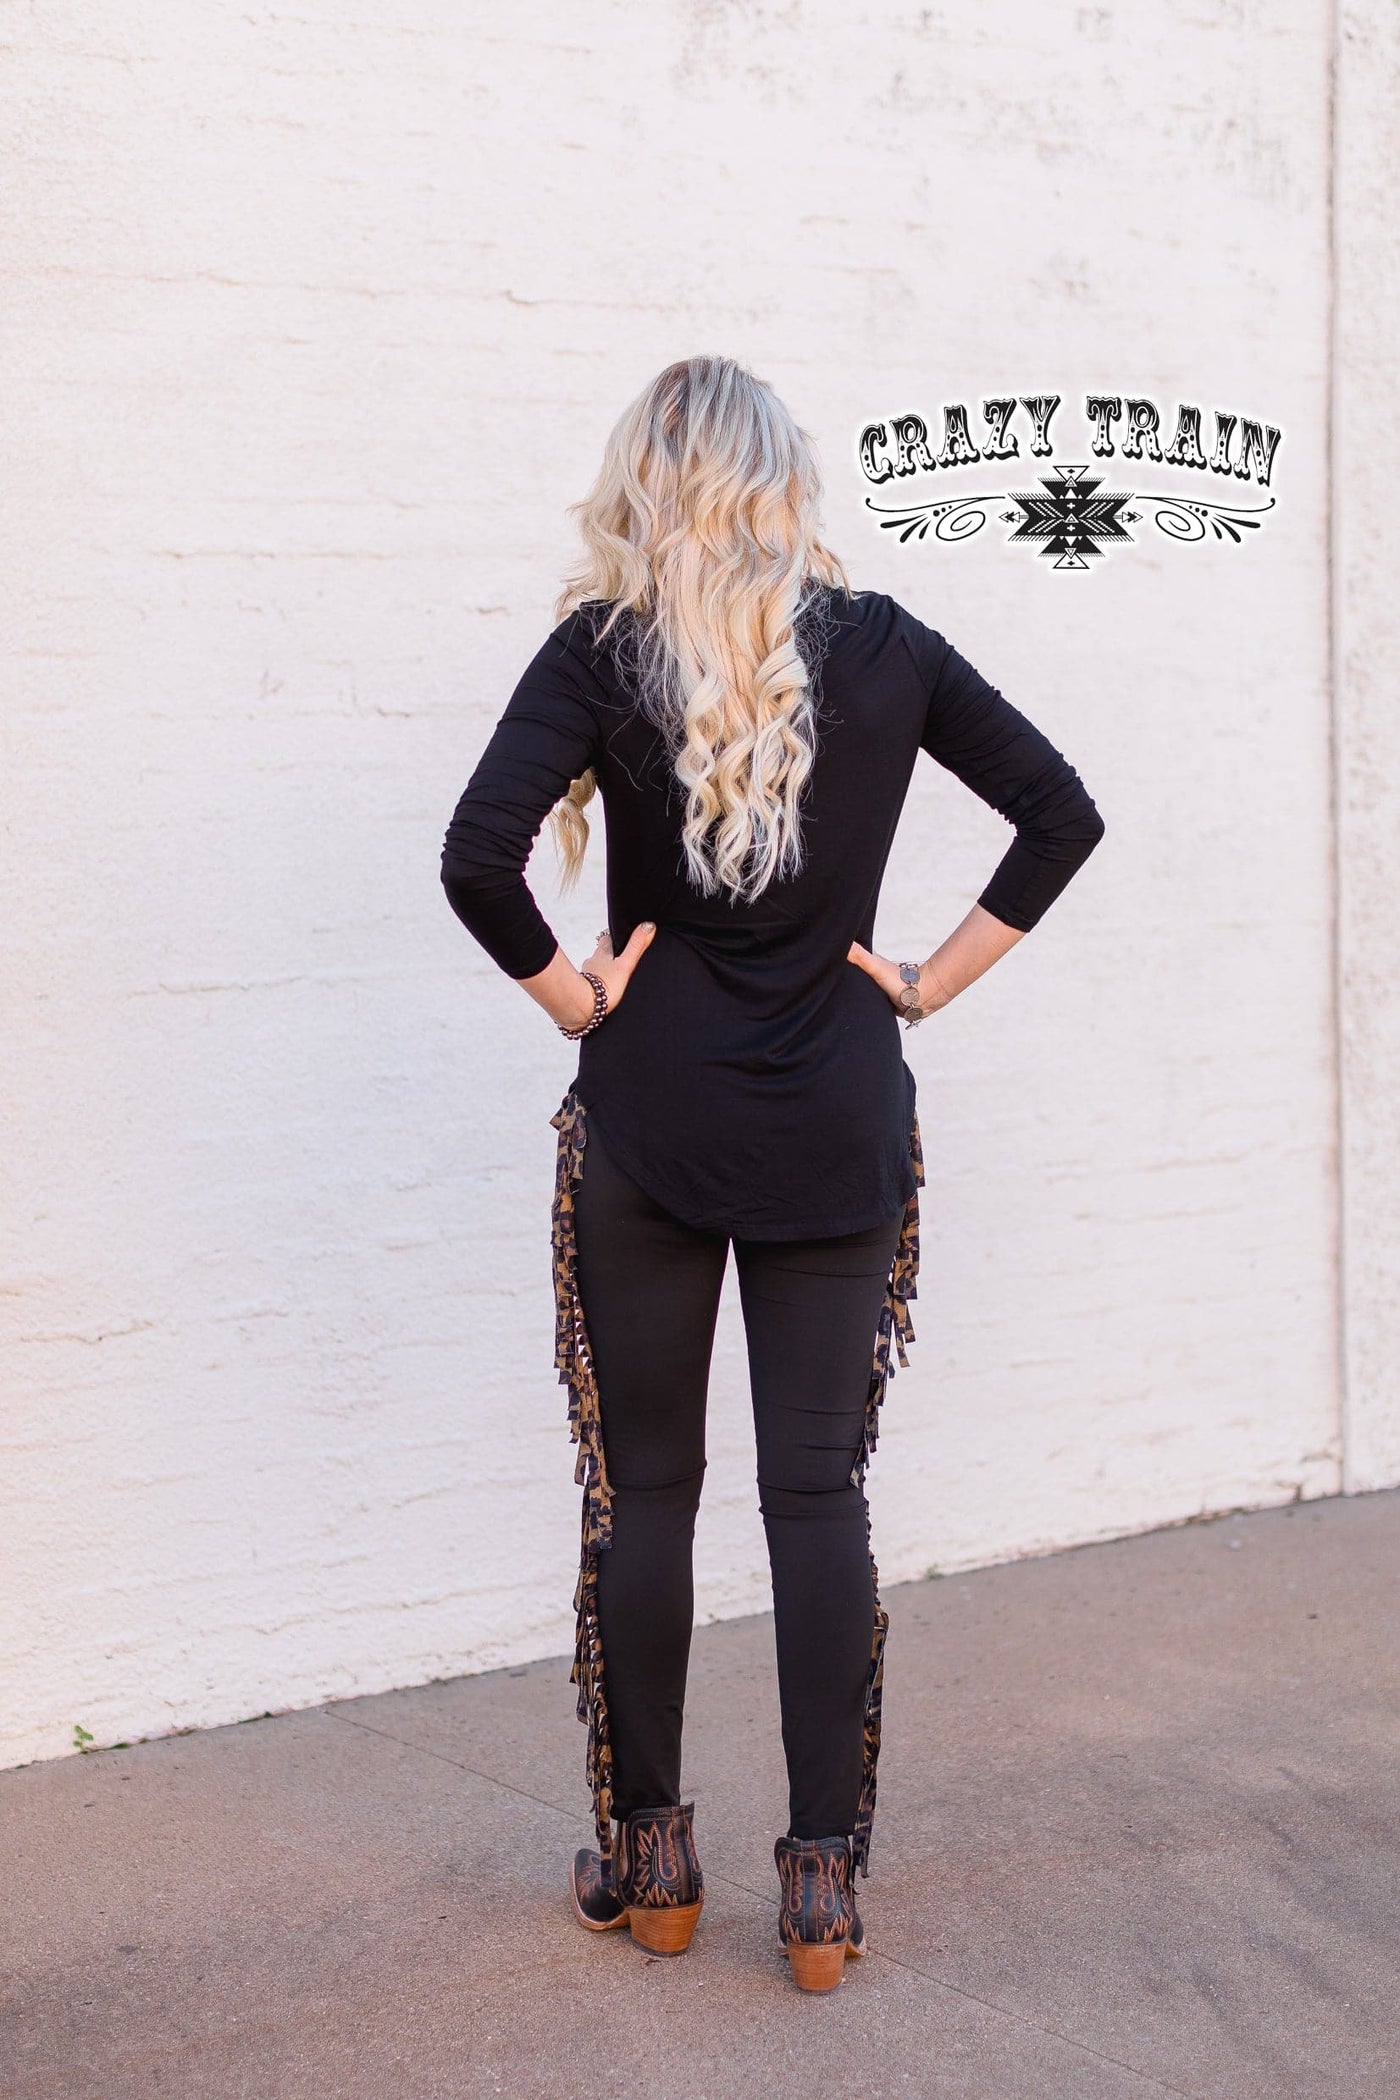 Leggings  Meow Town Leggings from Crazy Train Clothing